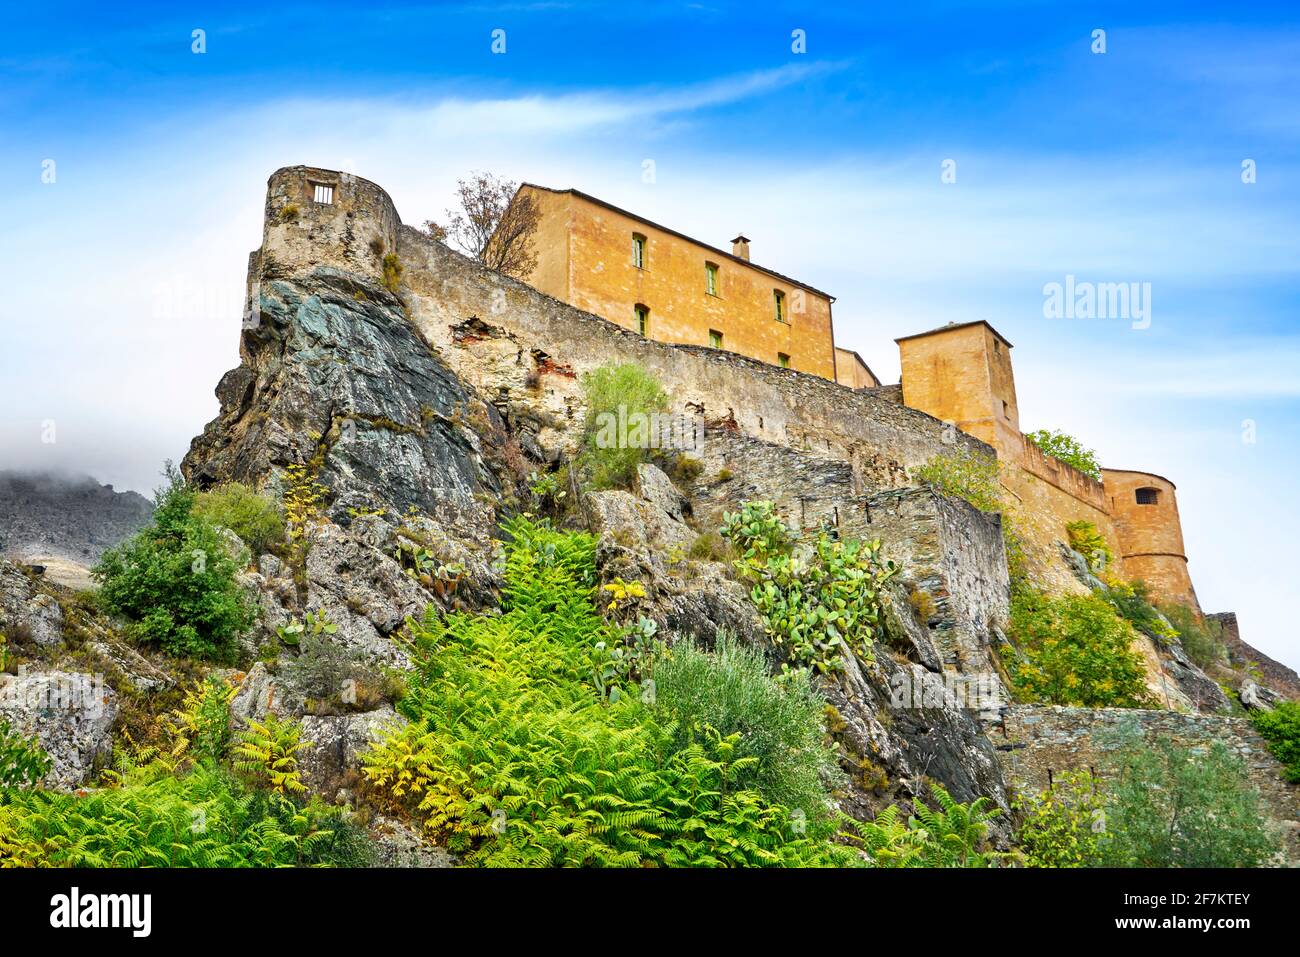 Corte, former capital of independent Corsica, the citadel in the Old Town, Corsica Island, France Stock Photo